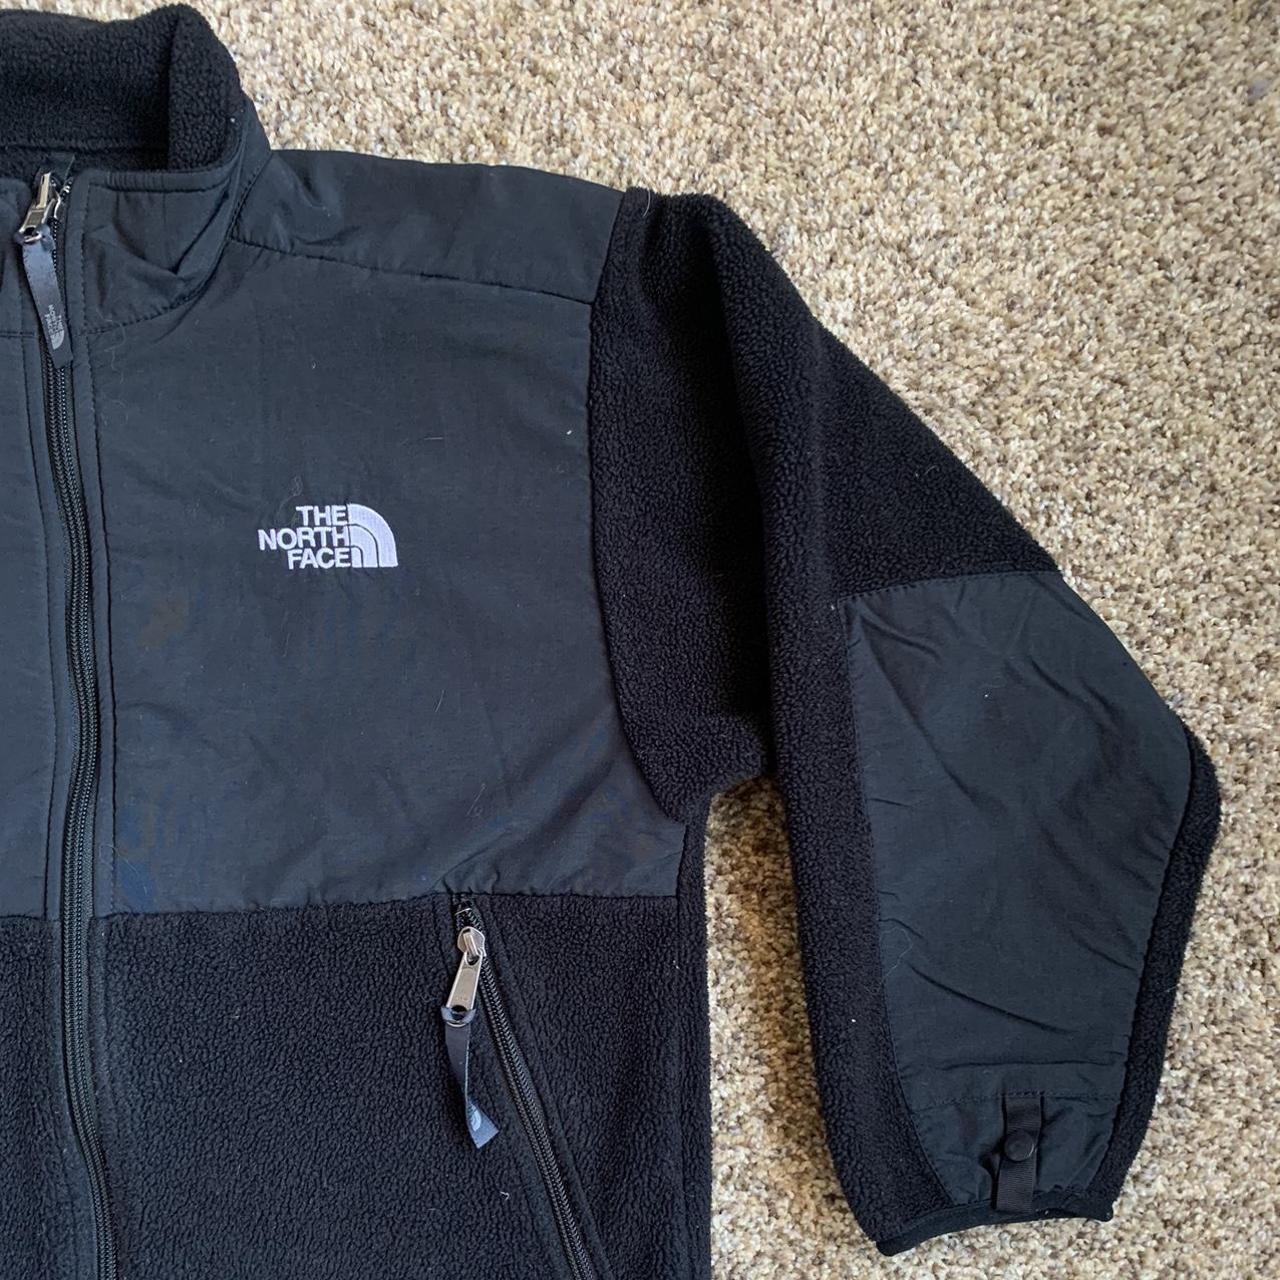 The North Face Women's Black and White Jacket (2)